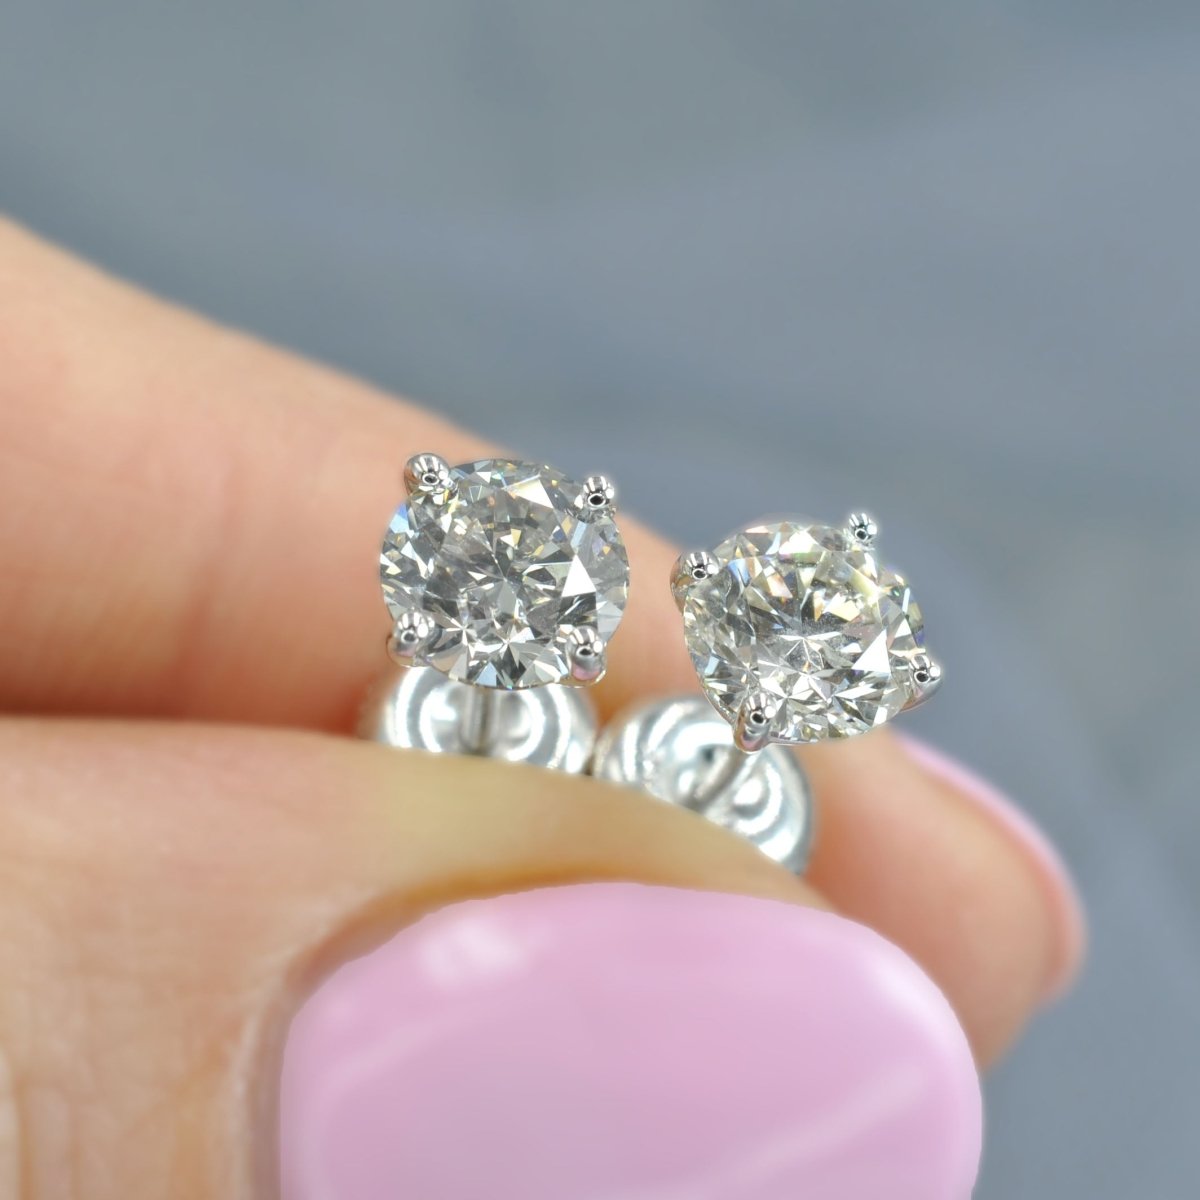 Certified 1.30CT Round Cut Diamond Stud Earrings in 14KT White Gold - Primestyle.com